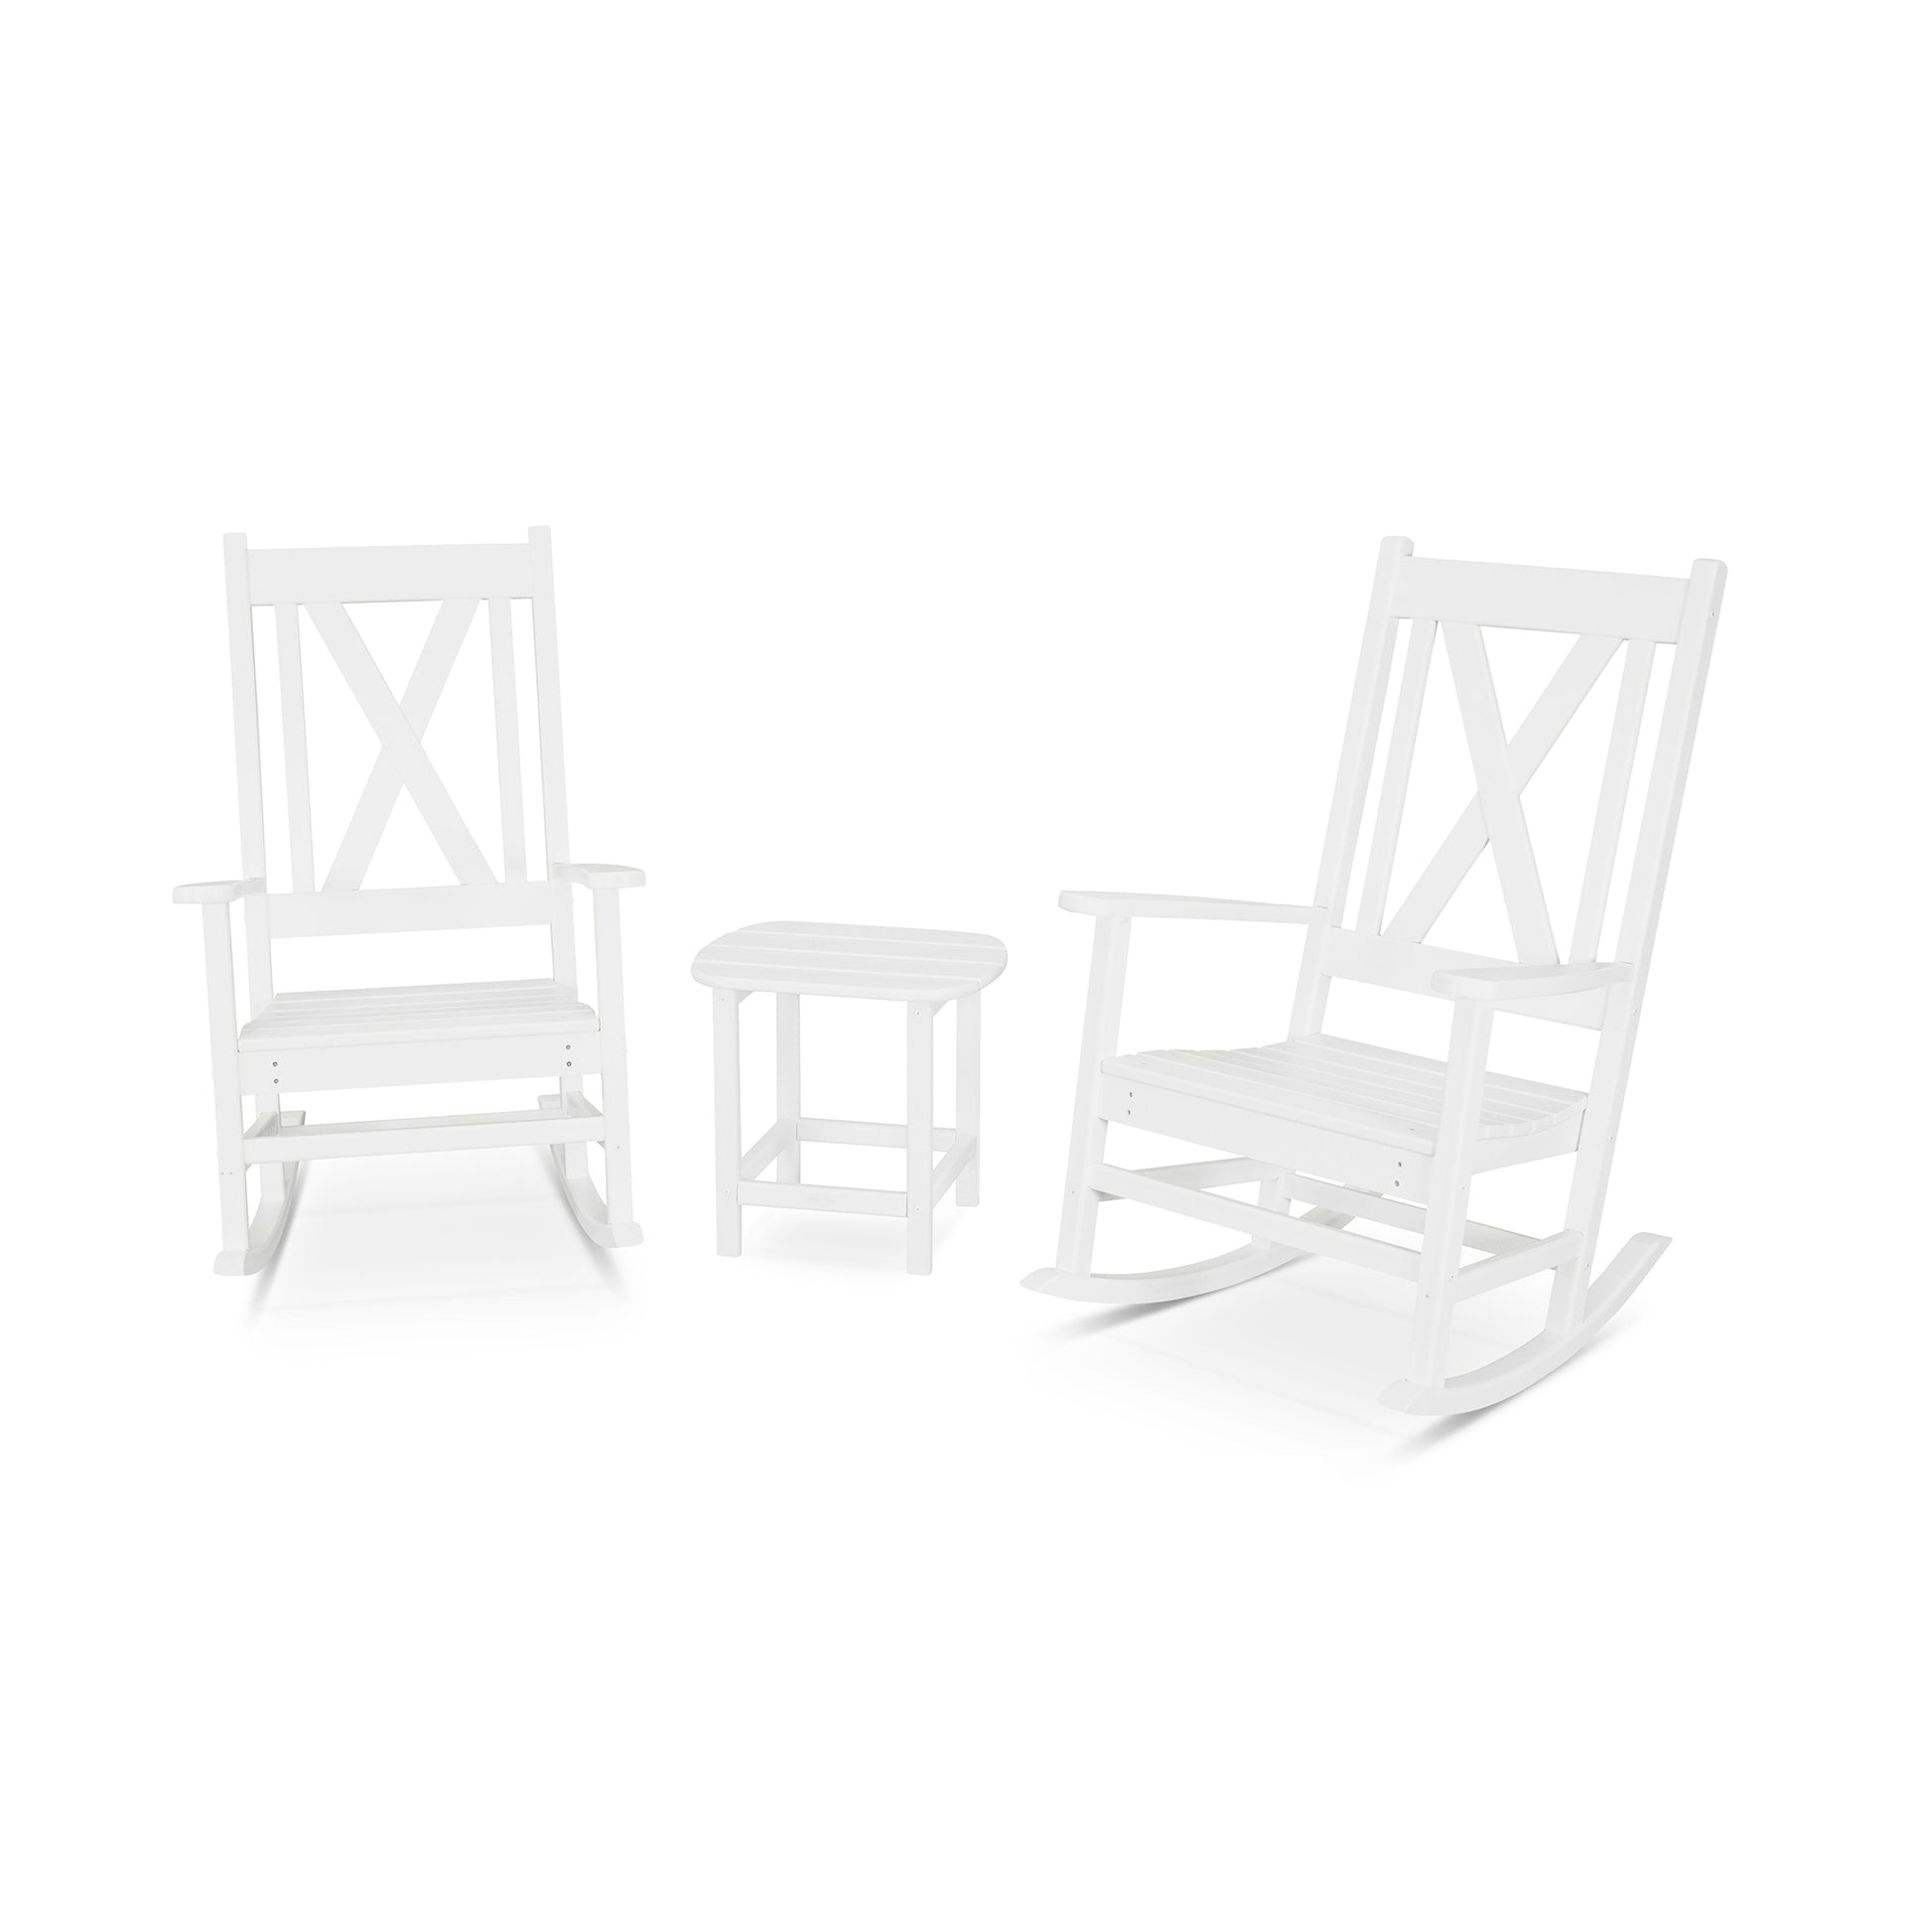 Two white wooden rocking chairs and a matching small stool from the POLYWOOD Braxton 3-Piece Porch Rocking Chair Set, set on a plain white background.